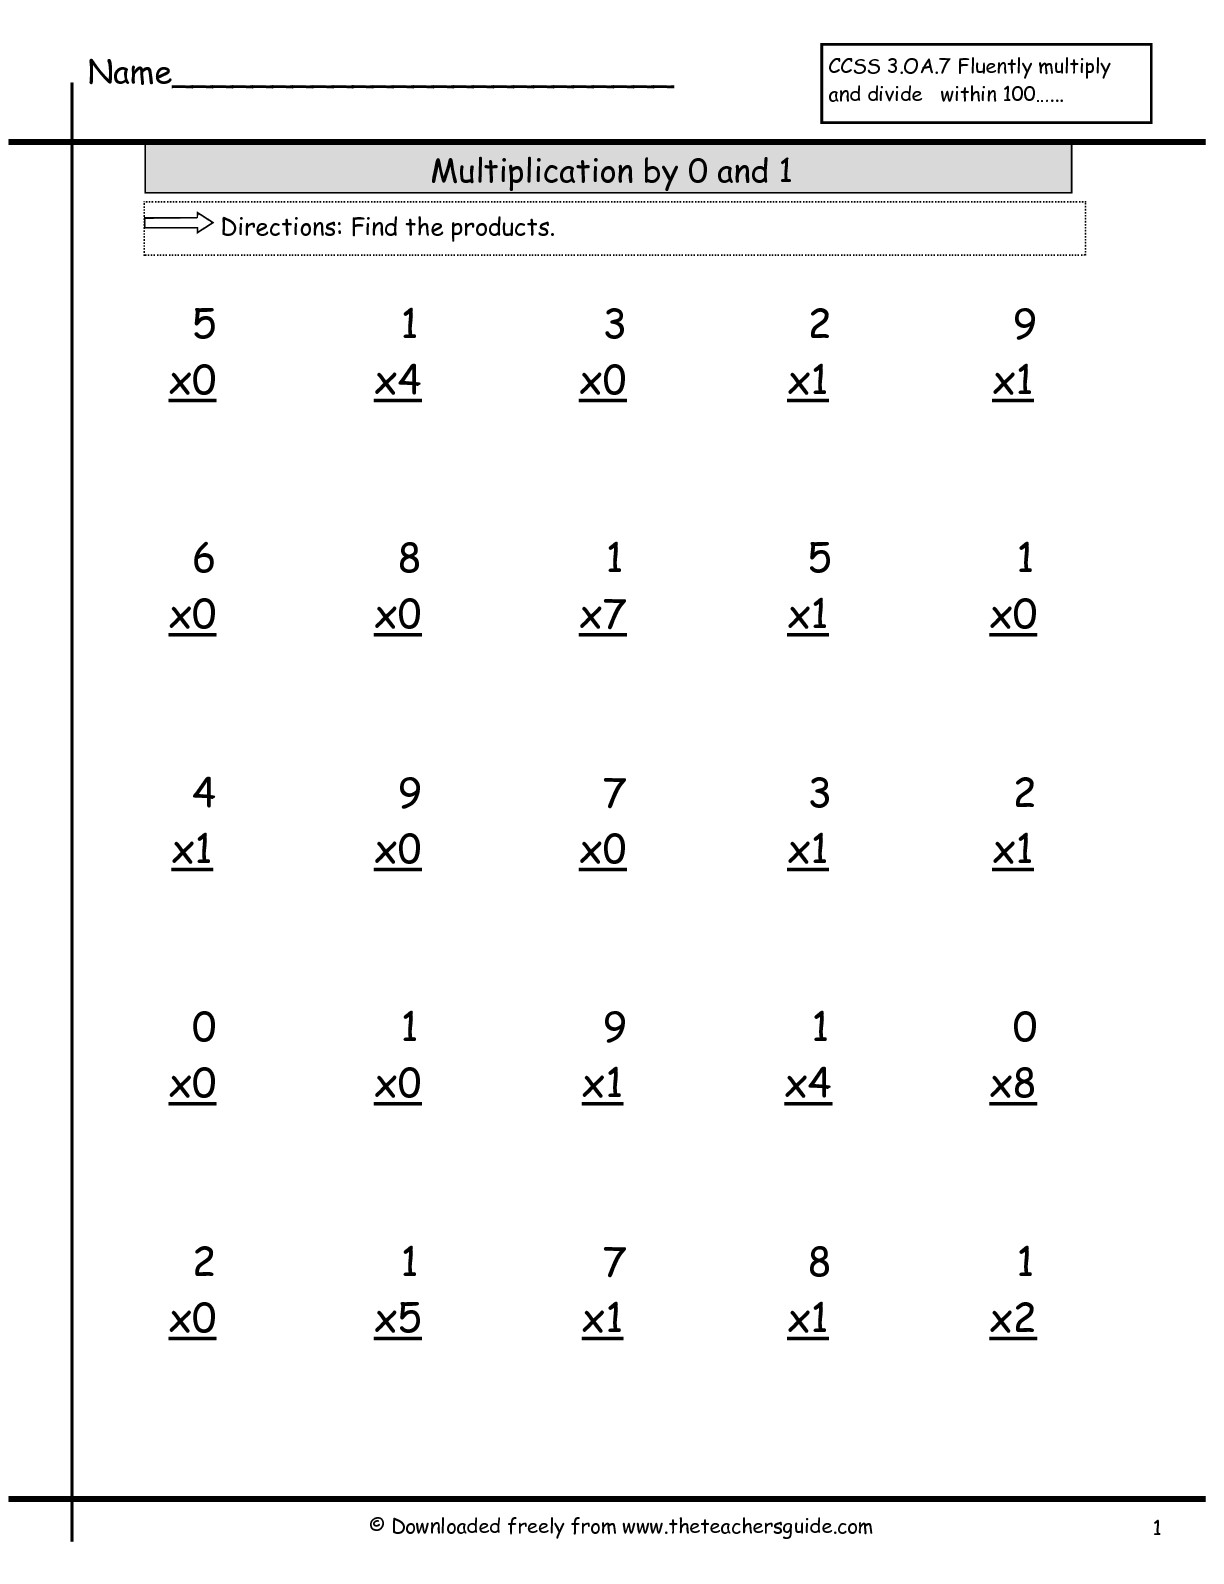 Multiplication Facts Worksheets From The Teacher&amp;#039;s Guide regarding 2 Multiplication Printable